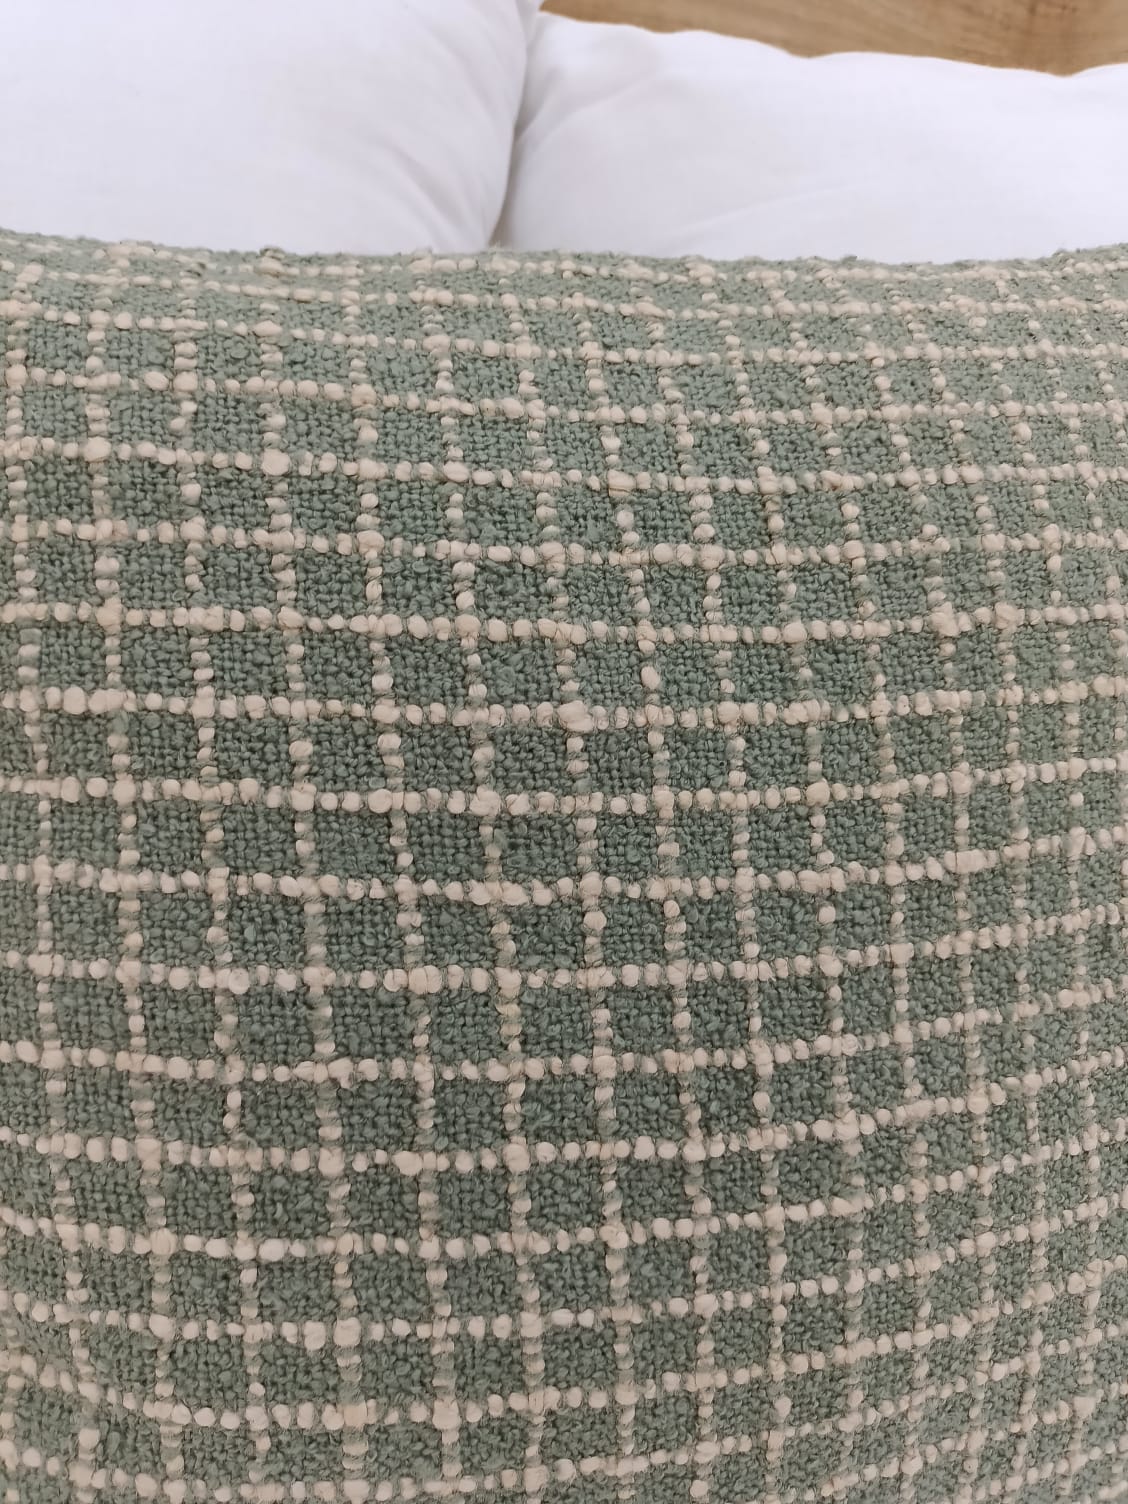 Set of 2 Handmade Checked Cotton Square Cotton Cushion Covers